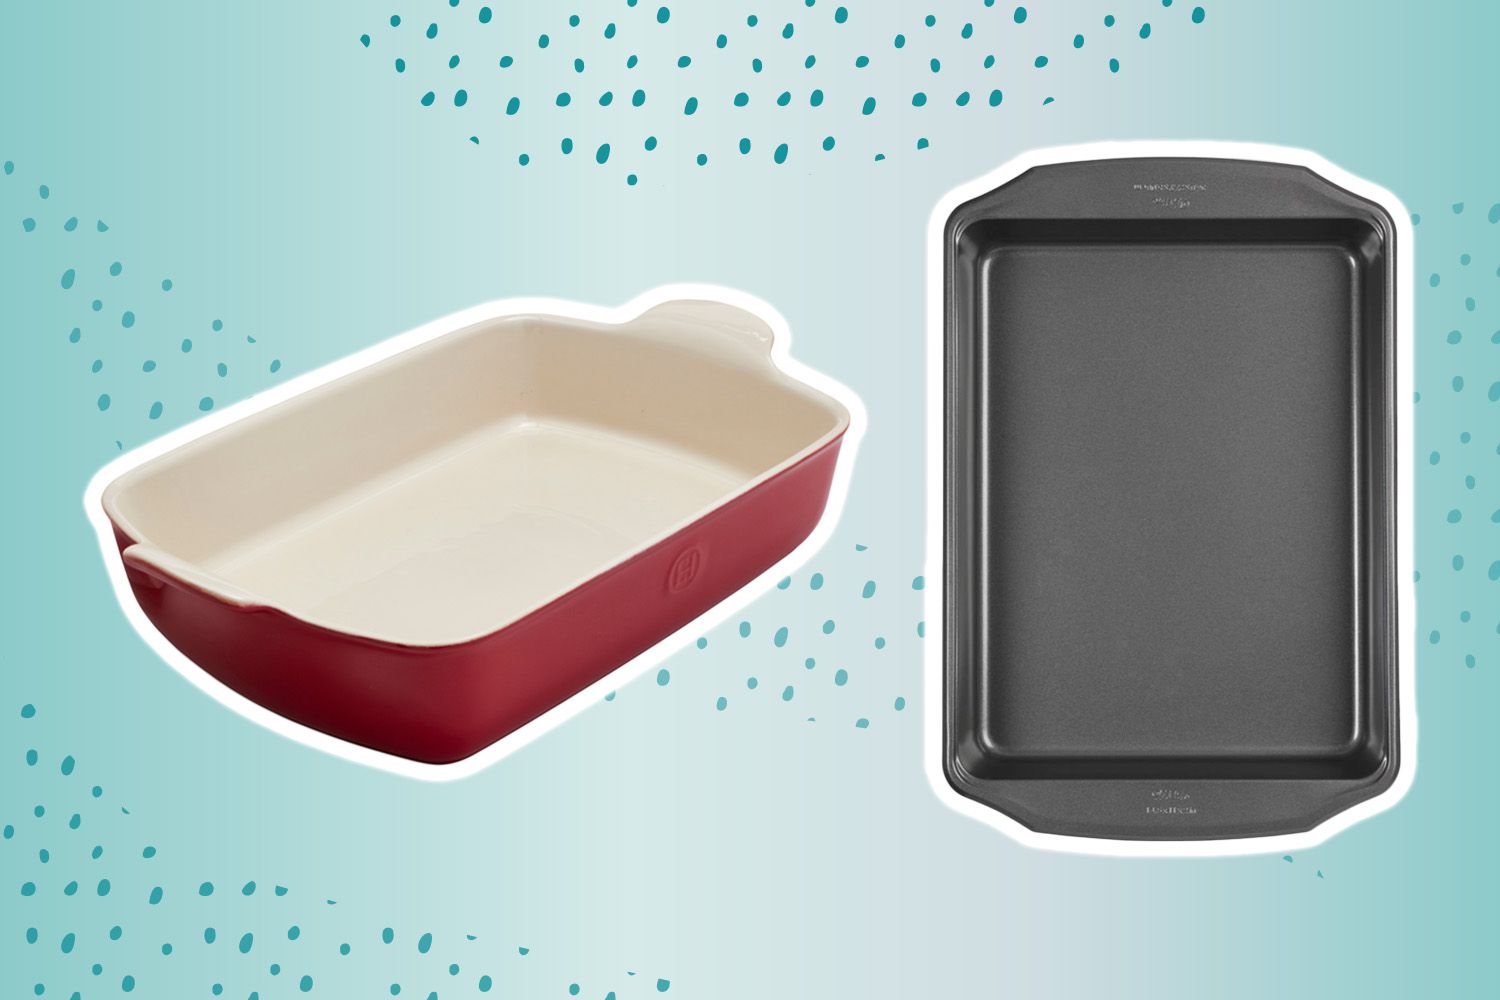 Lasagna Pan Review: The Perfect Cookware for Delicious Pasta Dishes